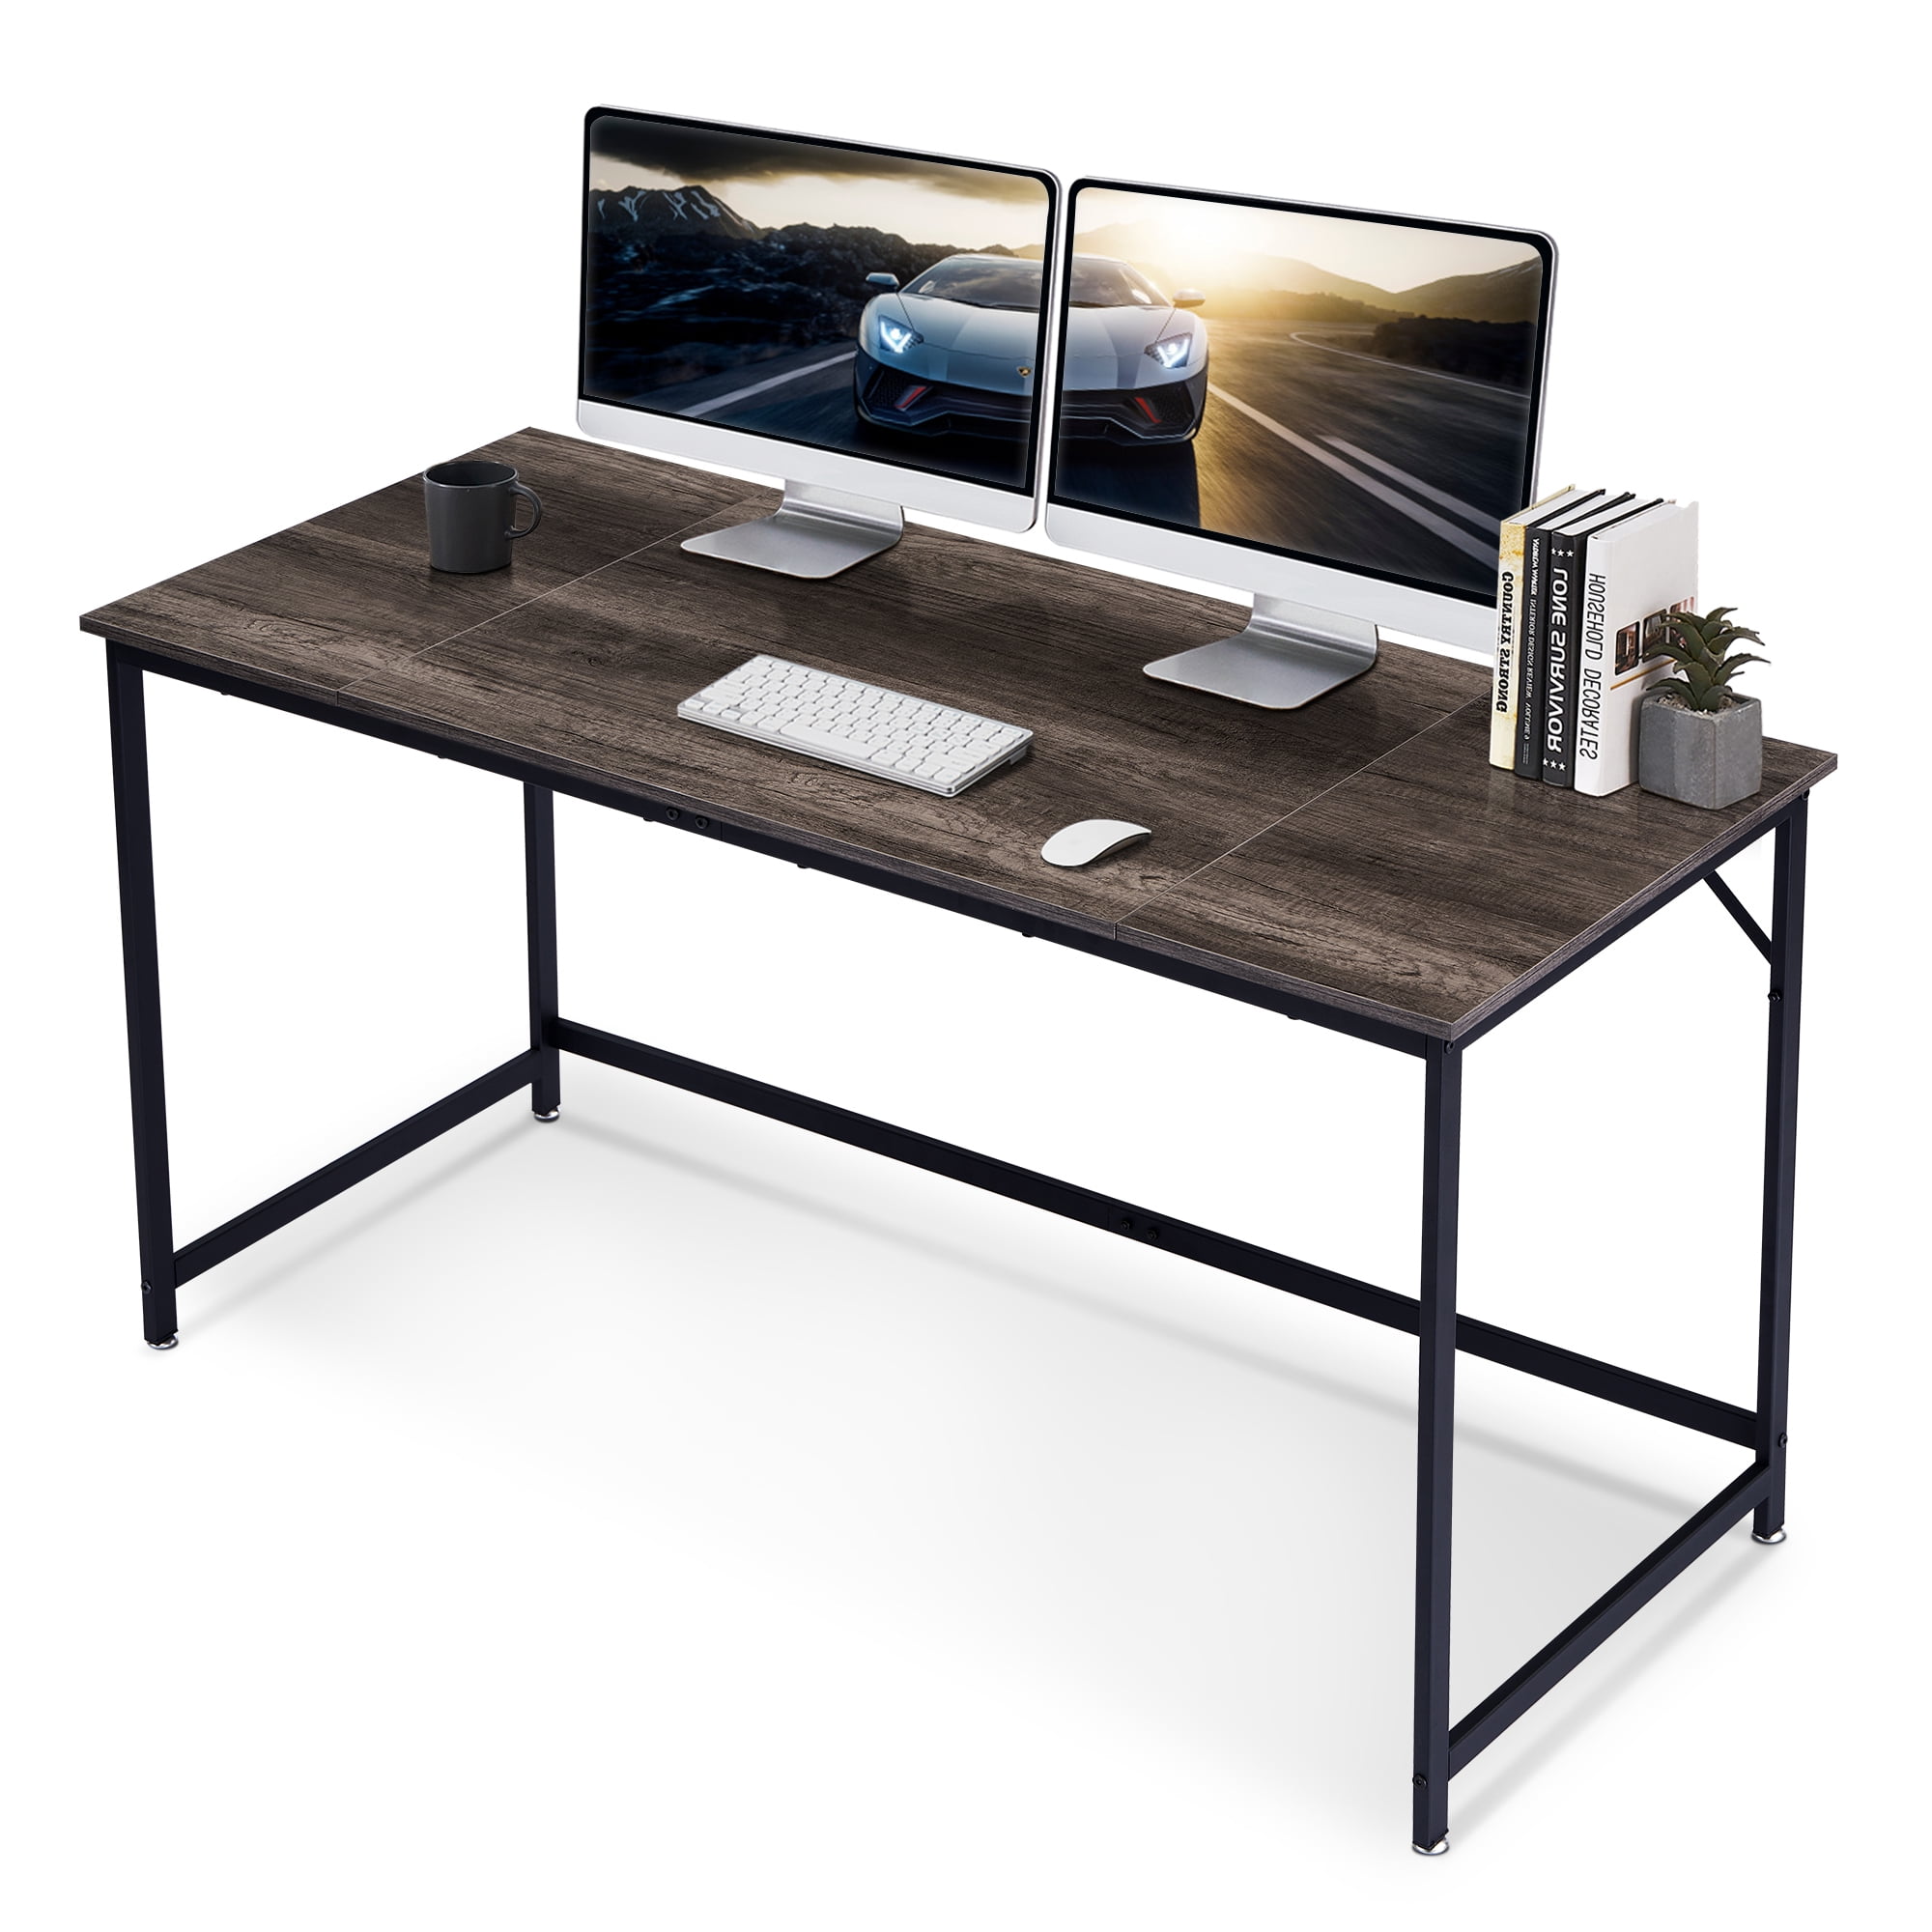 IRONCK Computer Desk 55 Industrial Writing Desk Office Desk Gaming Desk with Sturdy Metal Frame Espresso Simple Study Table Workstation for Home Office